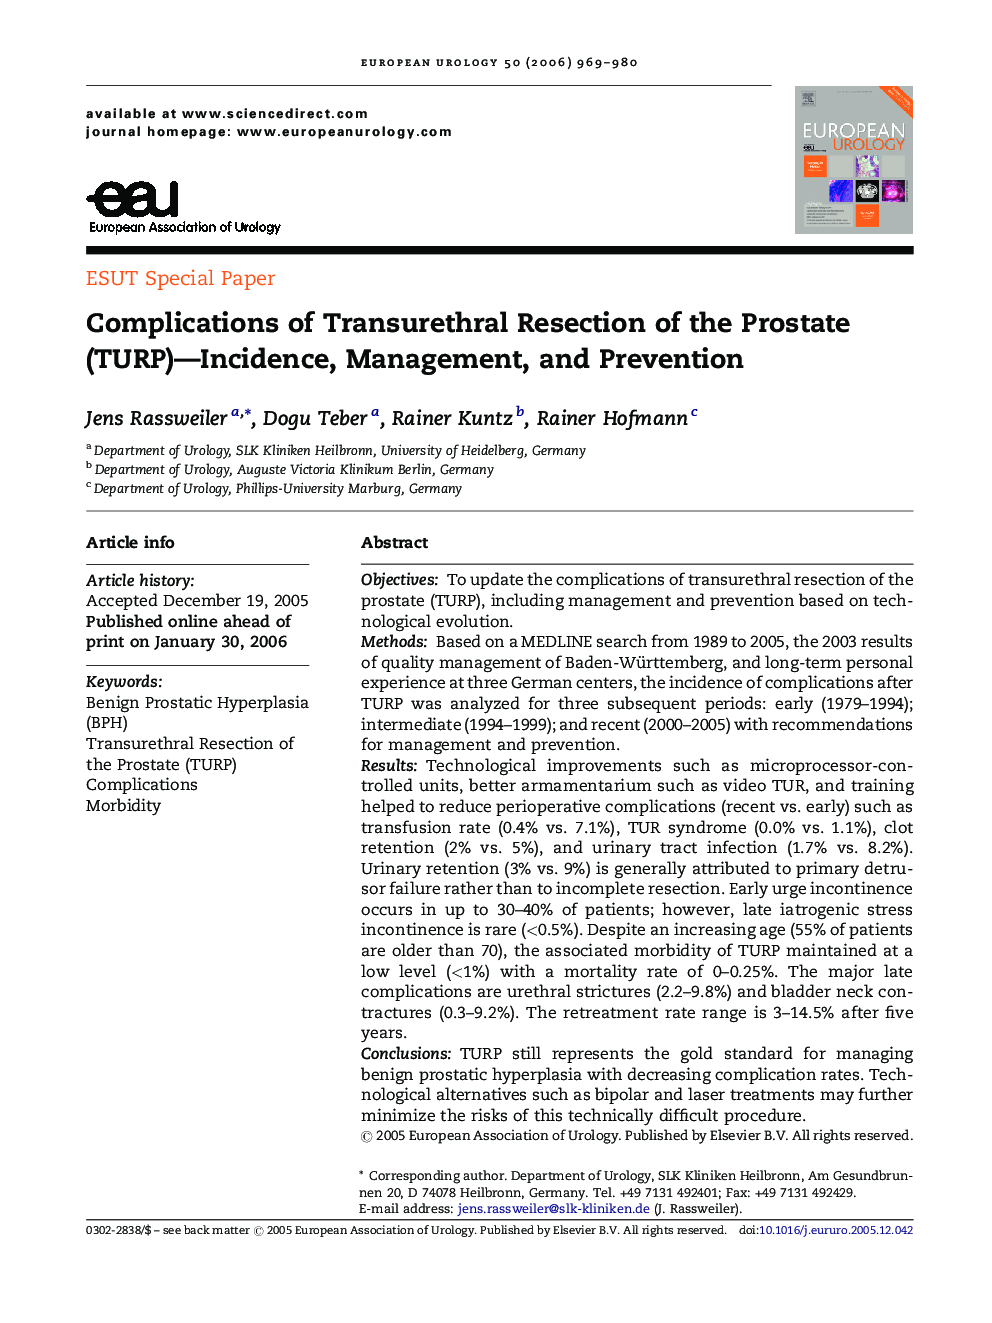 Complications of Transurethral Resection of the Prostate (TURP)—Incidence, Management, and Prevention